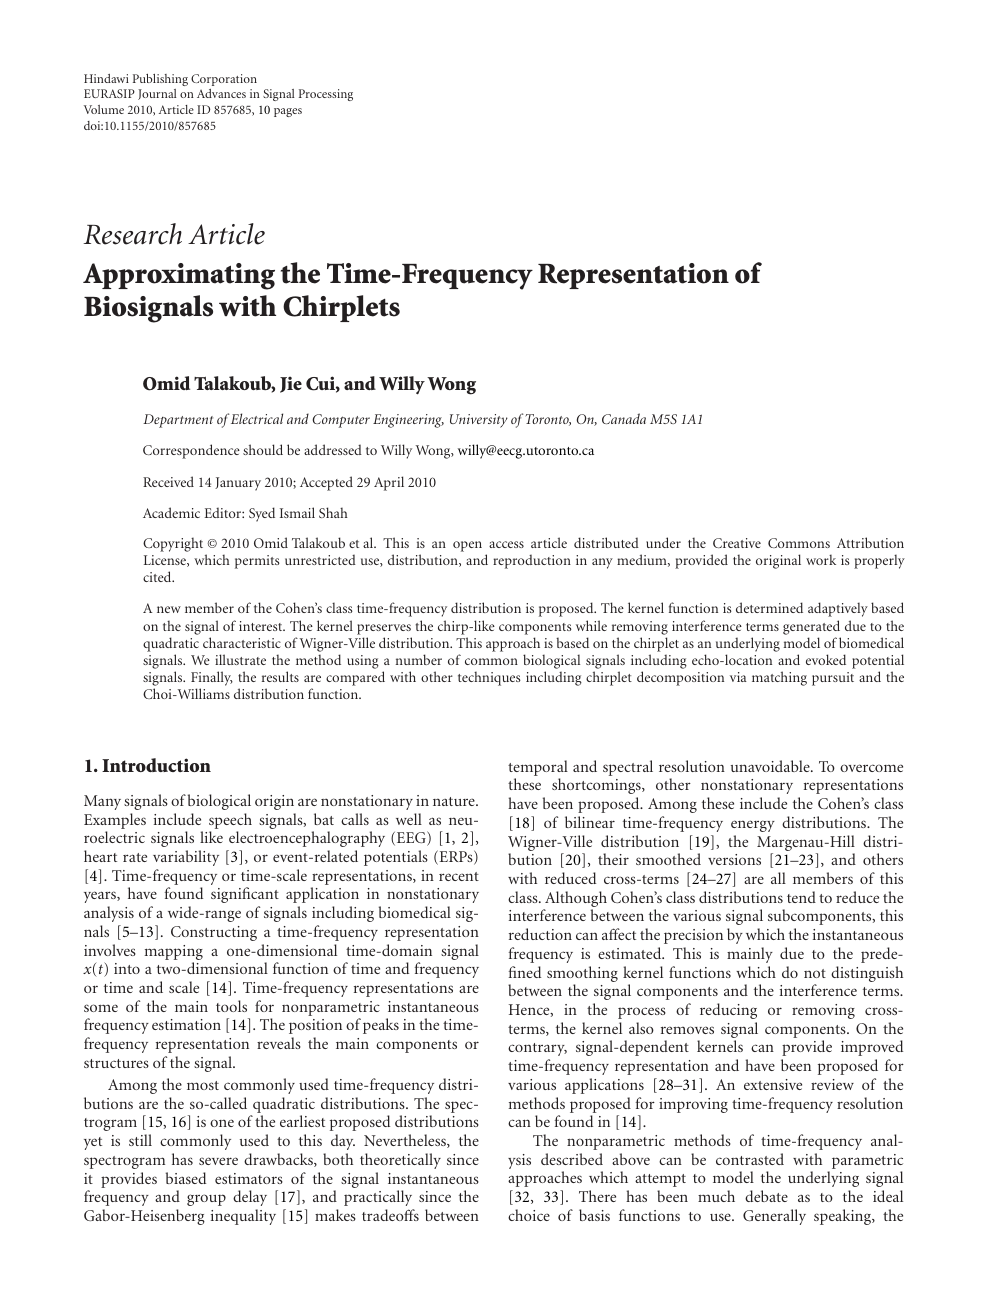 Approximating The Time Frequency Representation Of Biosignals With Chirplets Topic Of Research Paper In Electrical Engineering Electronic Engineering Information Engineering Download Scholarly Article Pdf And Read For Free On Cyberleninka Open Science